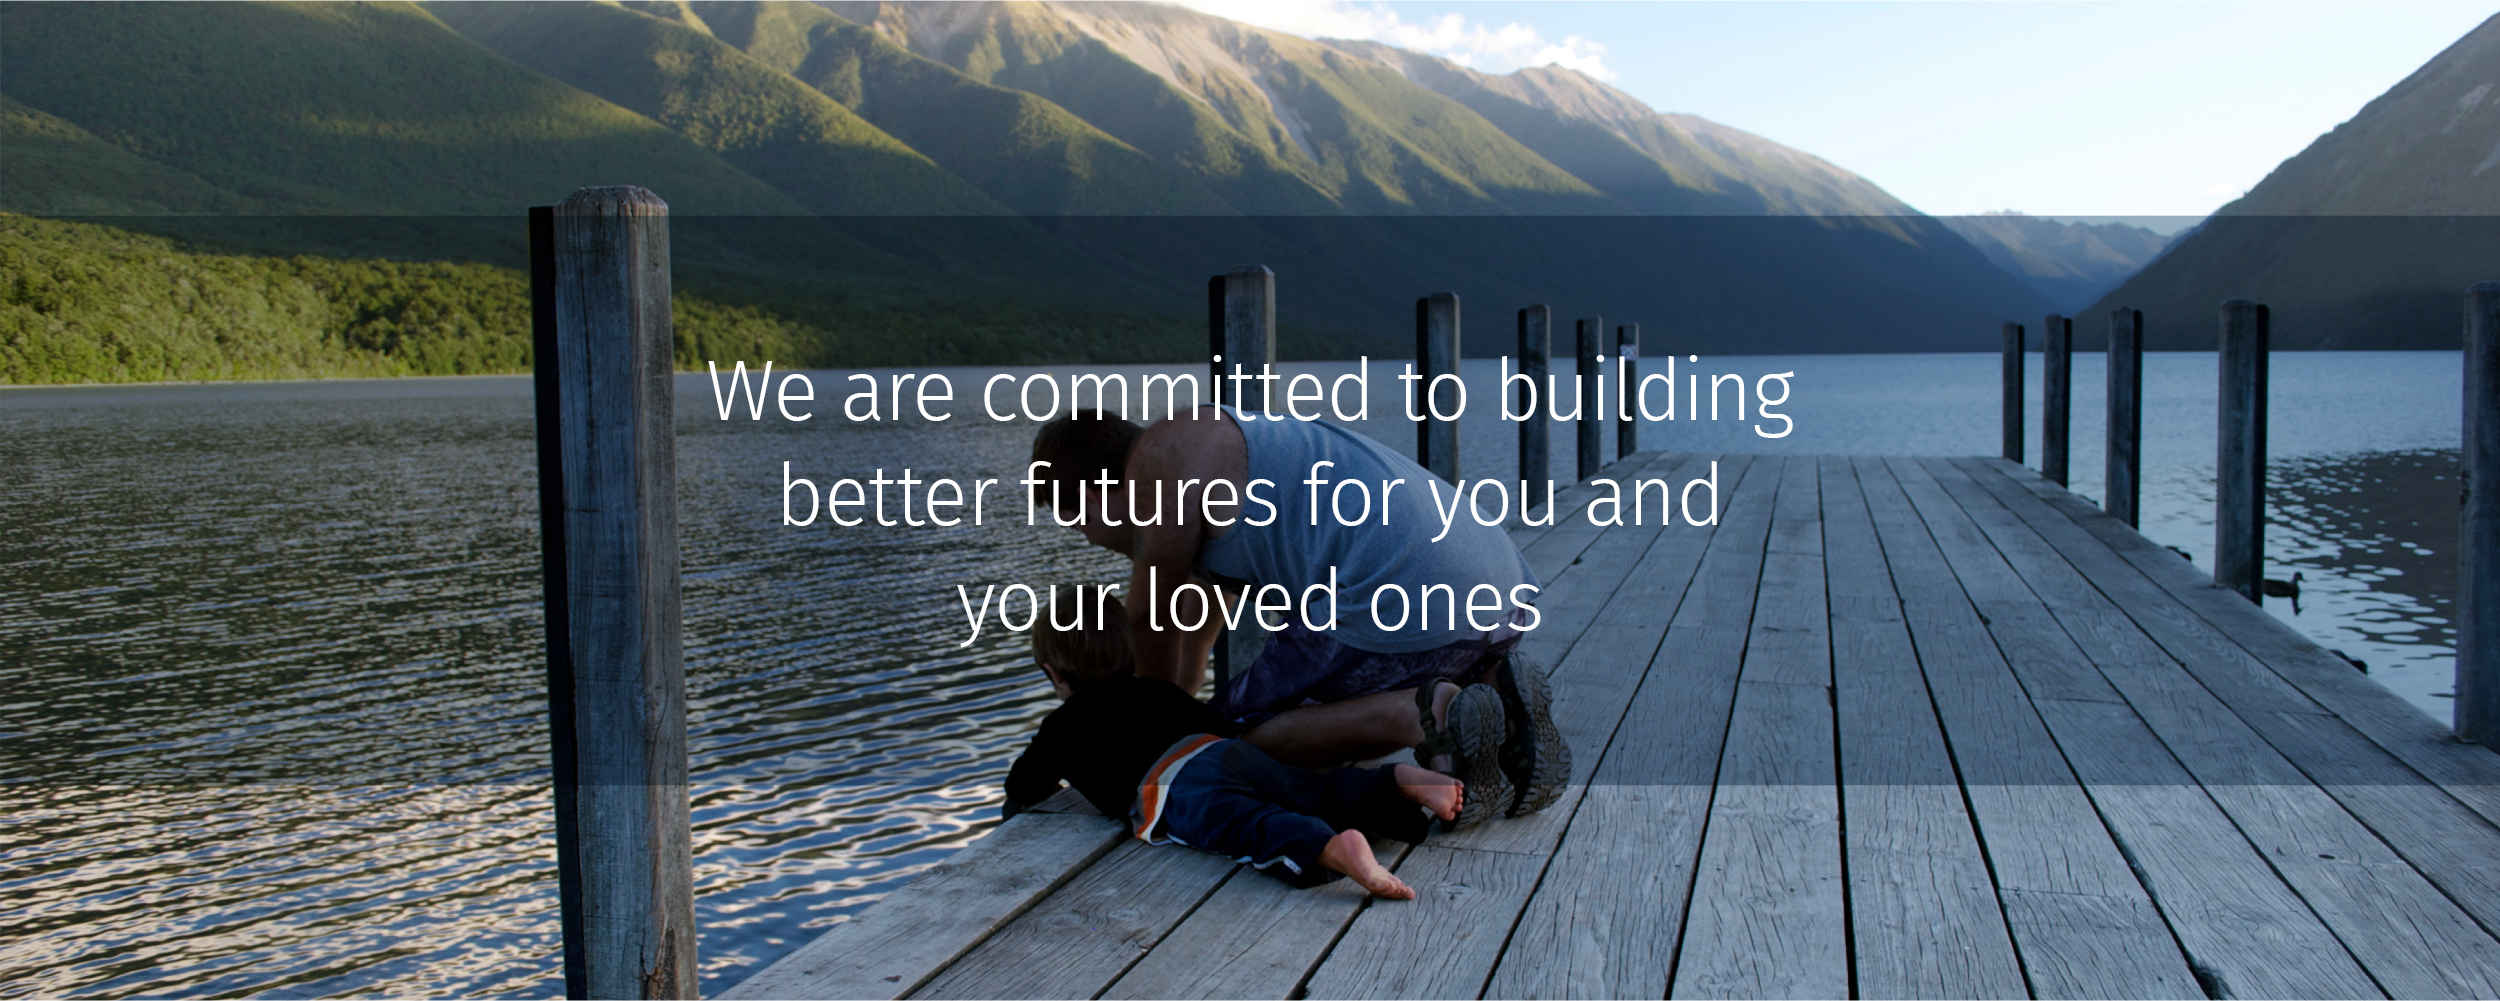 We are committed to building better futures for you and your loved ones